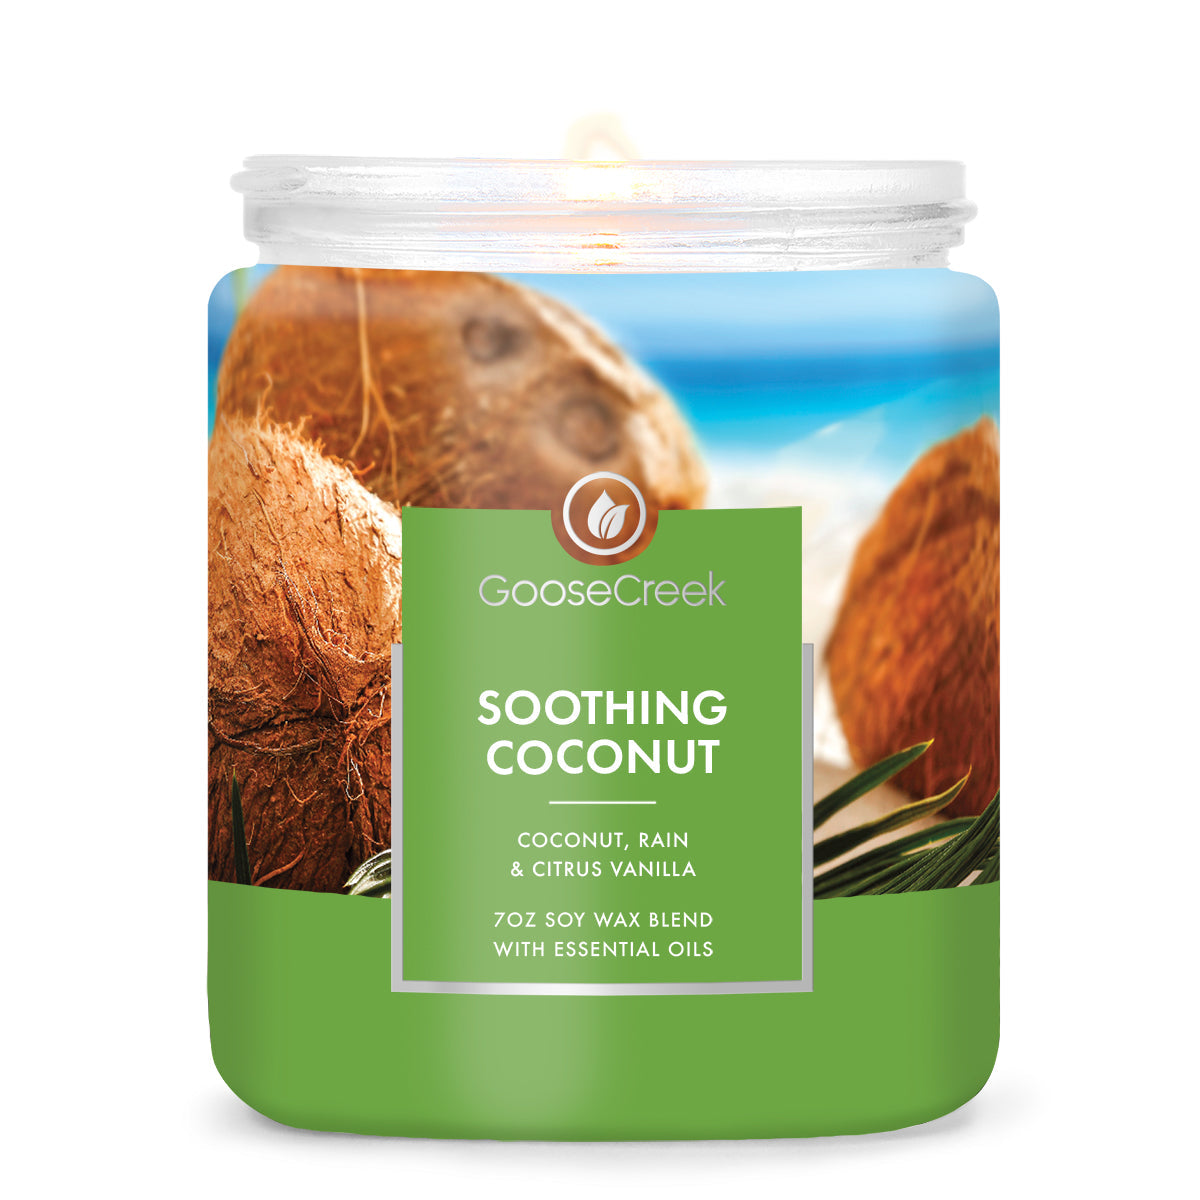 Soothing Coconut 7oz Single Wick Candle